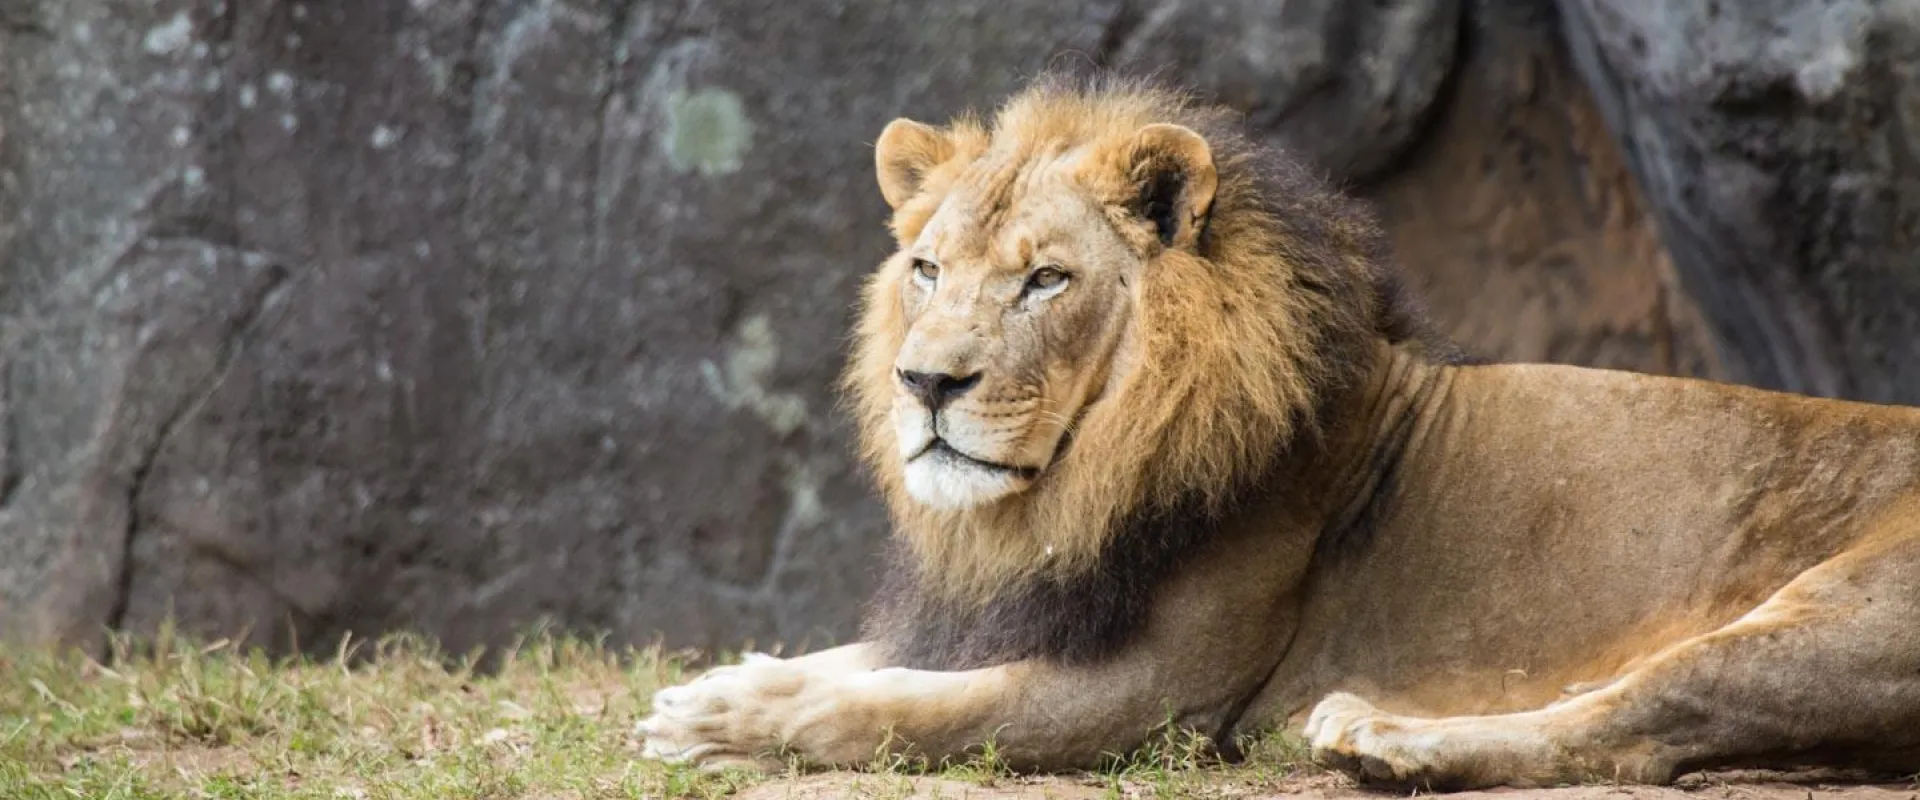 North Carolina Zoo announces death of 'fiercely devoted' elderly lion Reilly 